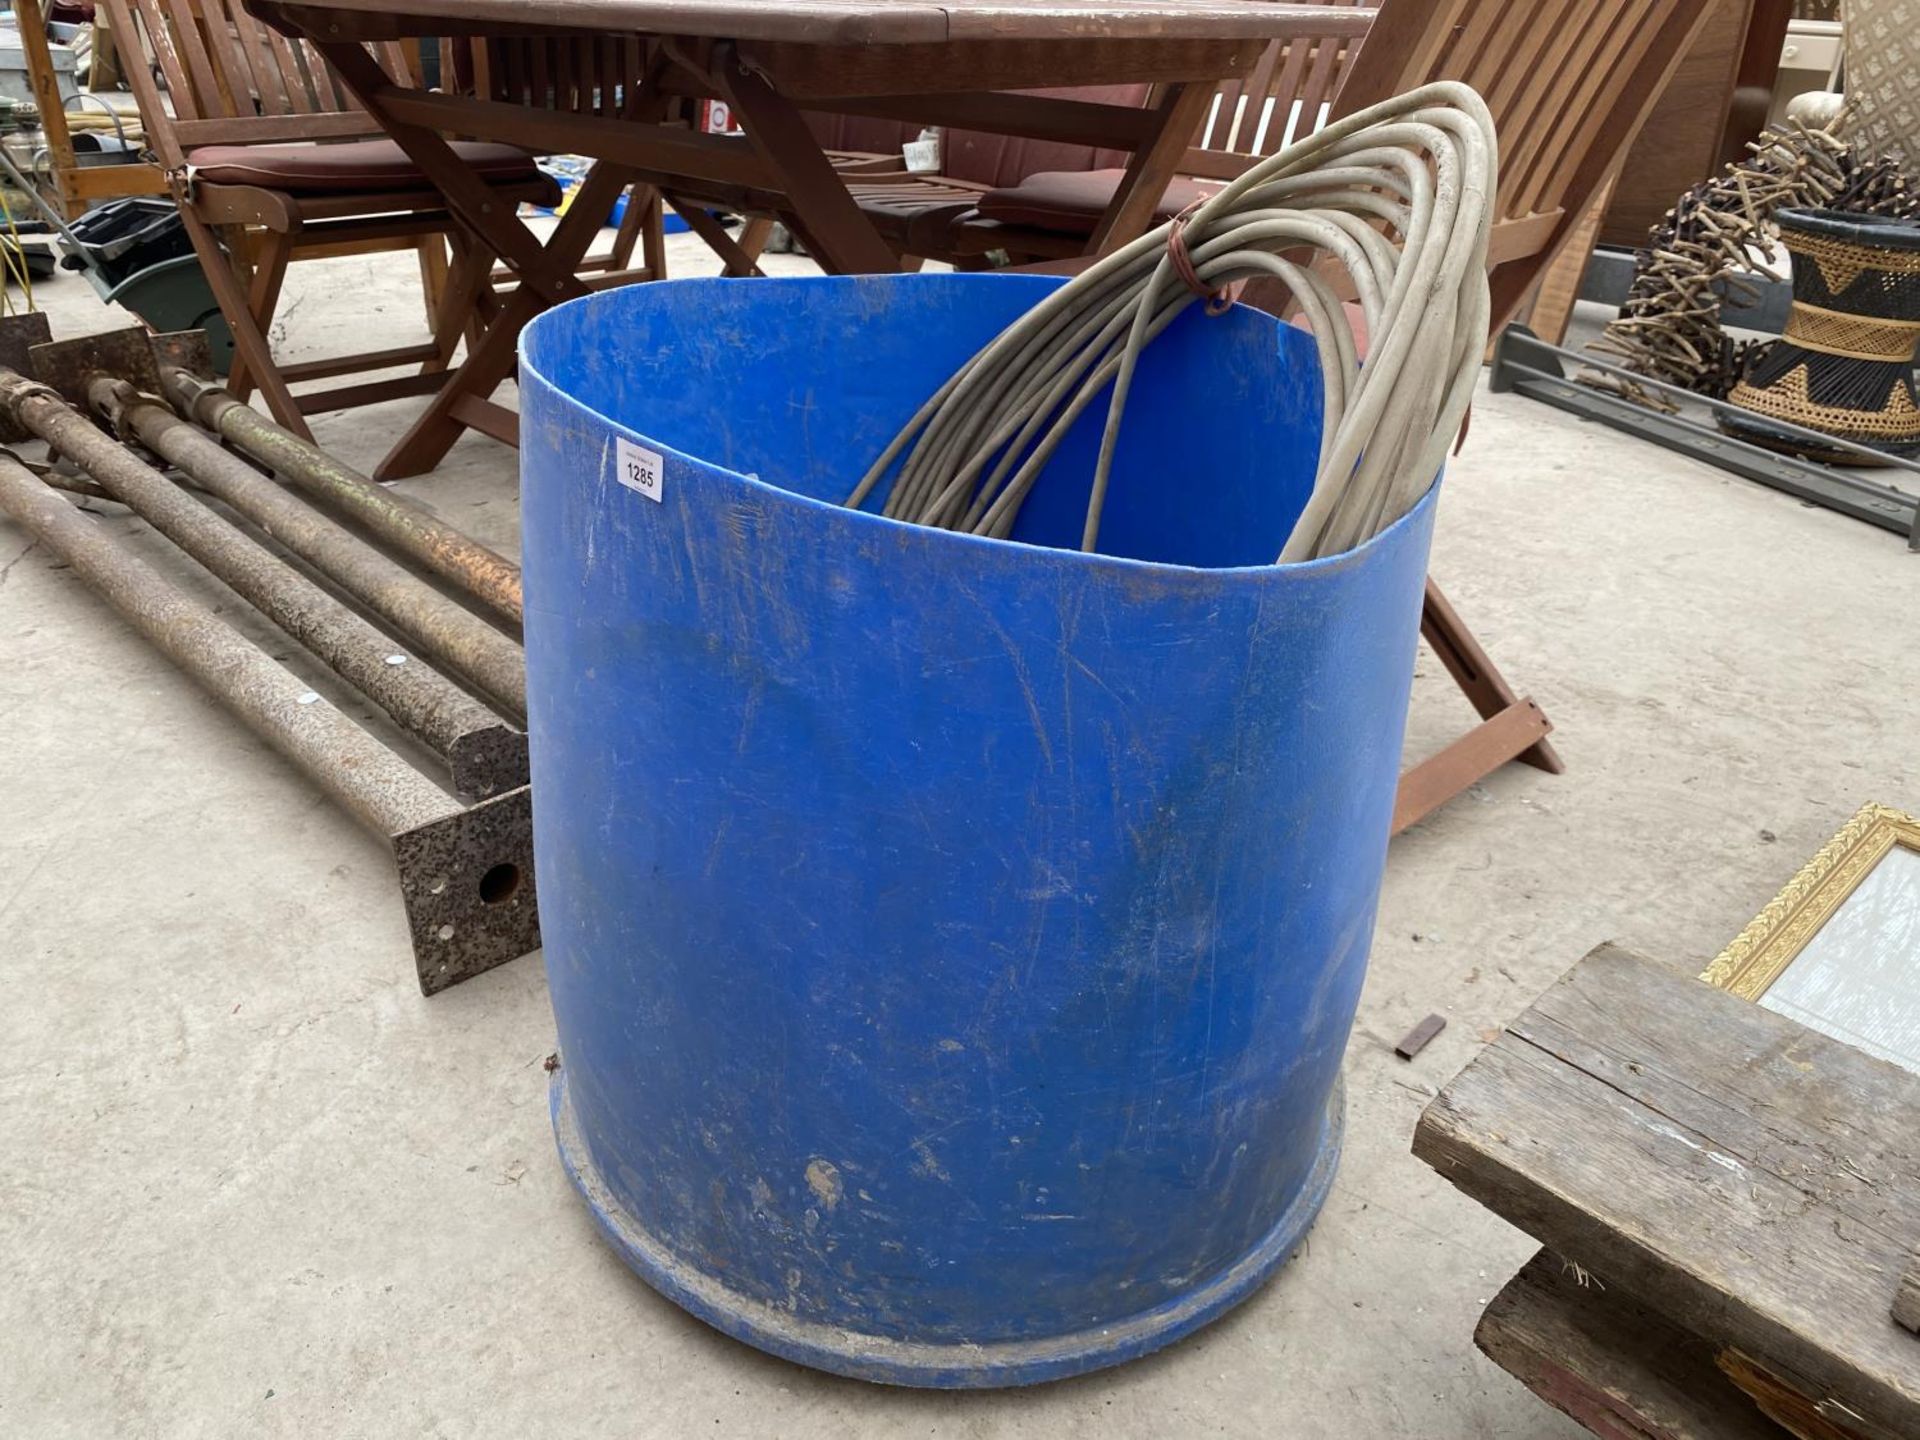 AN ASSORTMENT OF HARD WARE ITEMS TO INCLUDE HARD HATS, CABLE AND ELECTRICAL FITTINGS ETC